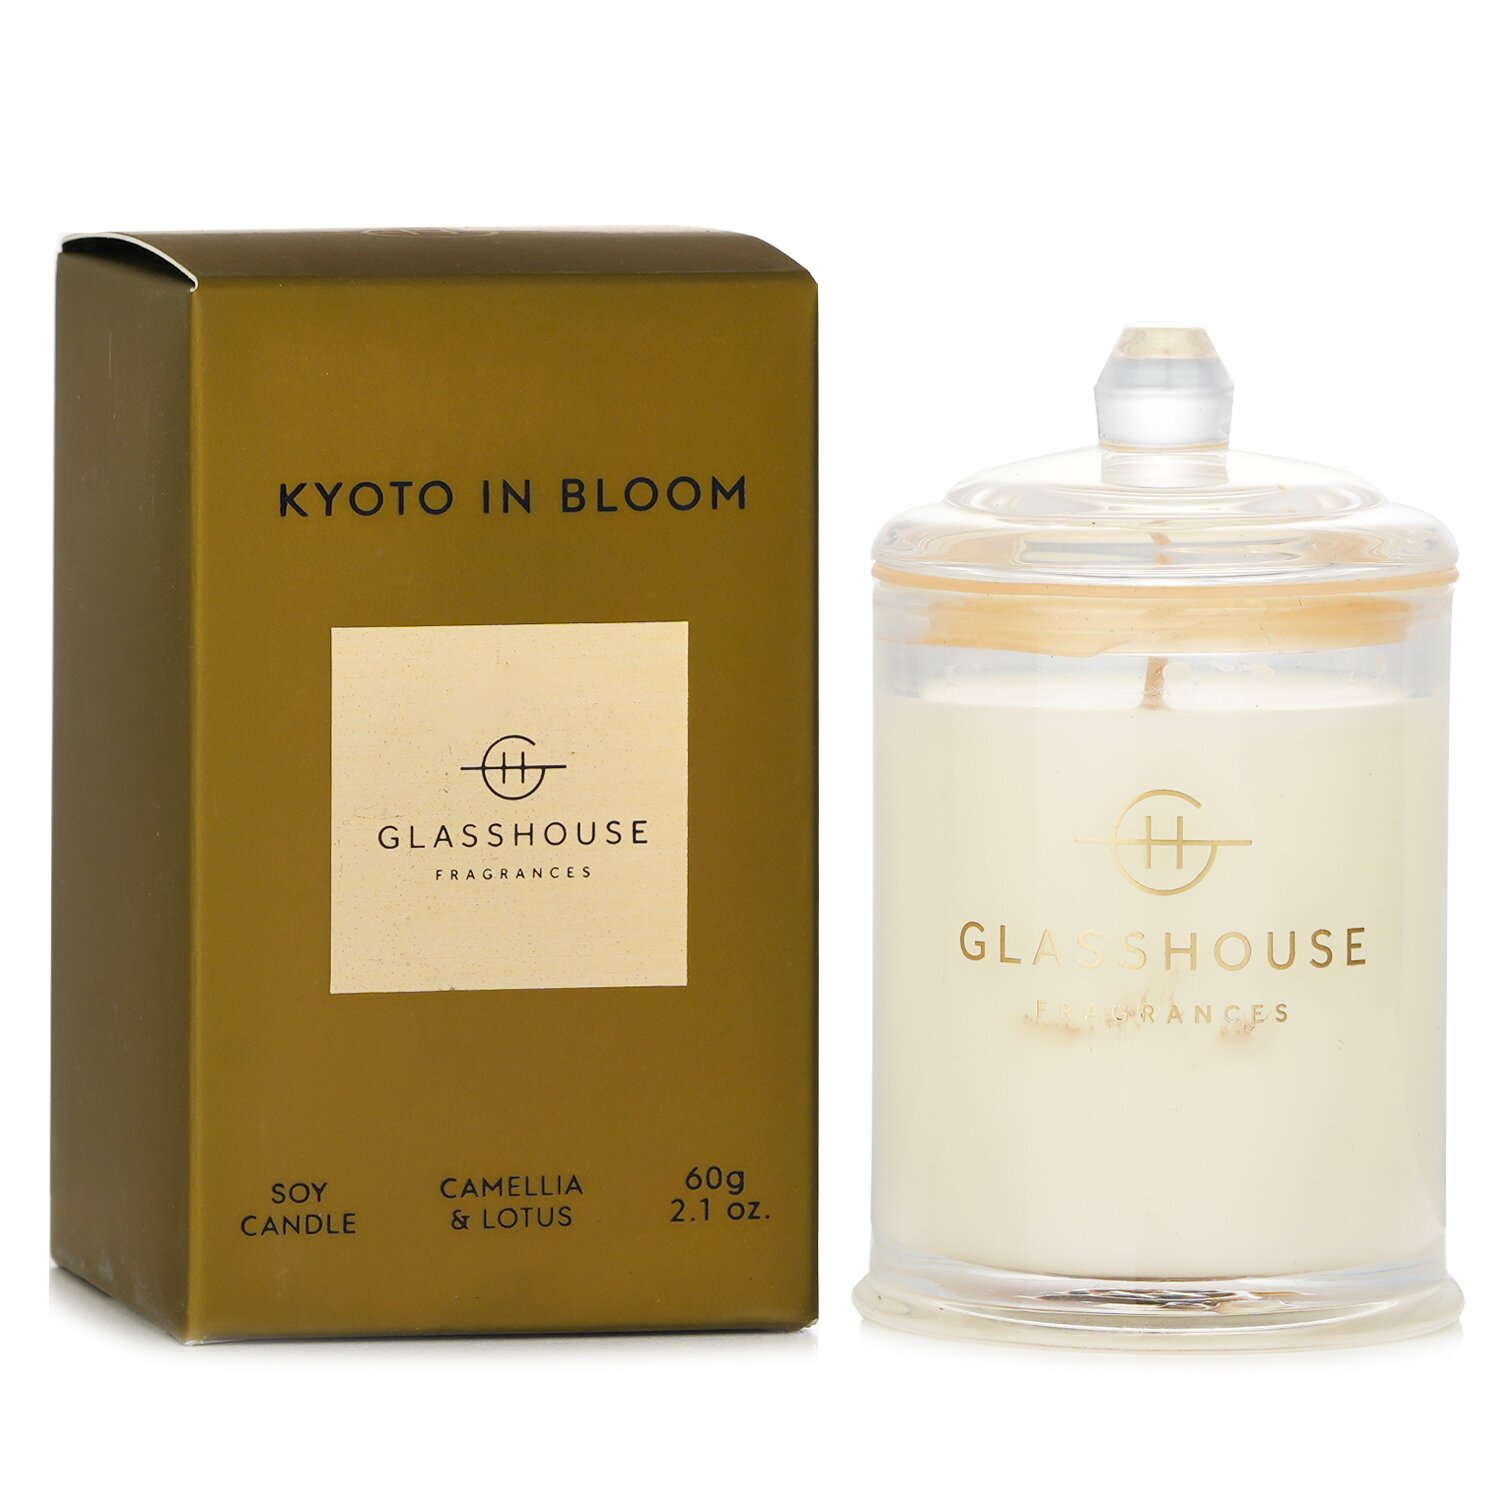 Glasshouse Triple Scented Soy Candle - Kyoto In Bloom (Camellia & Lotus) 60g/2.1oz